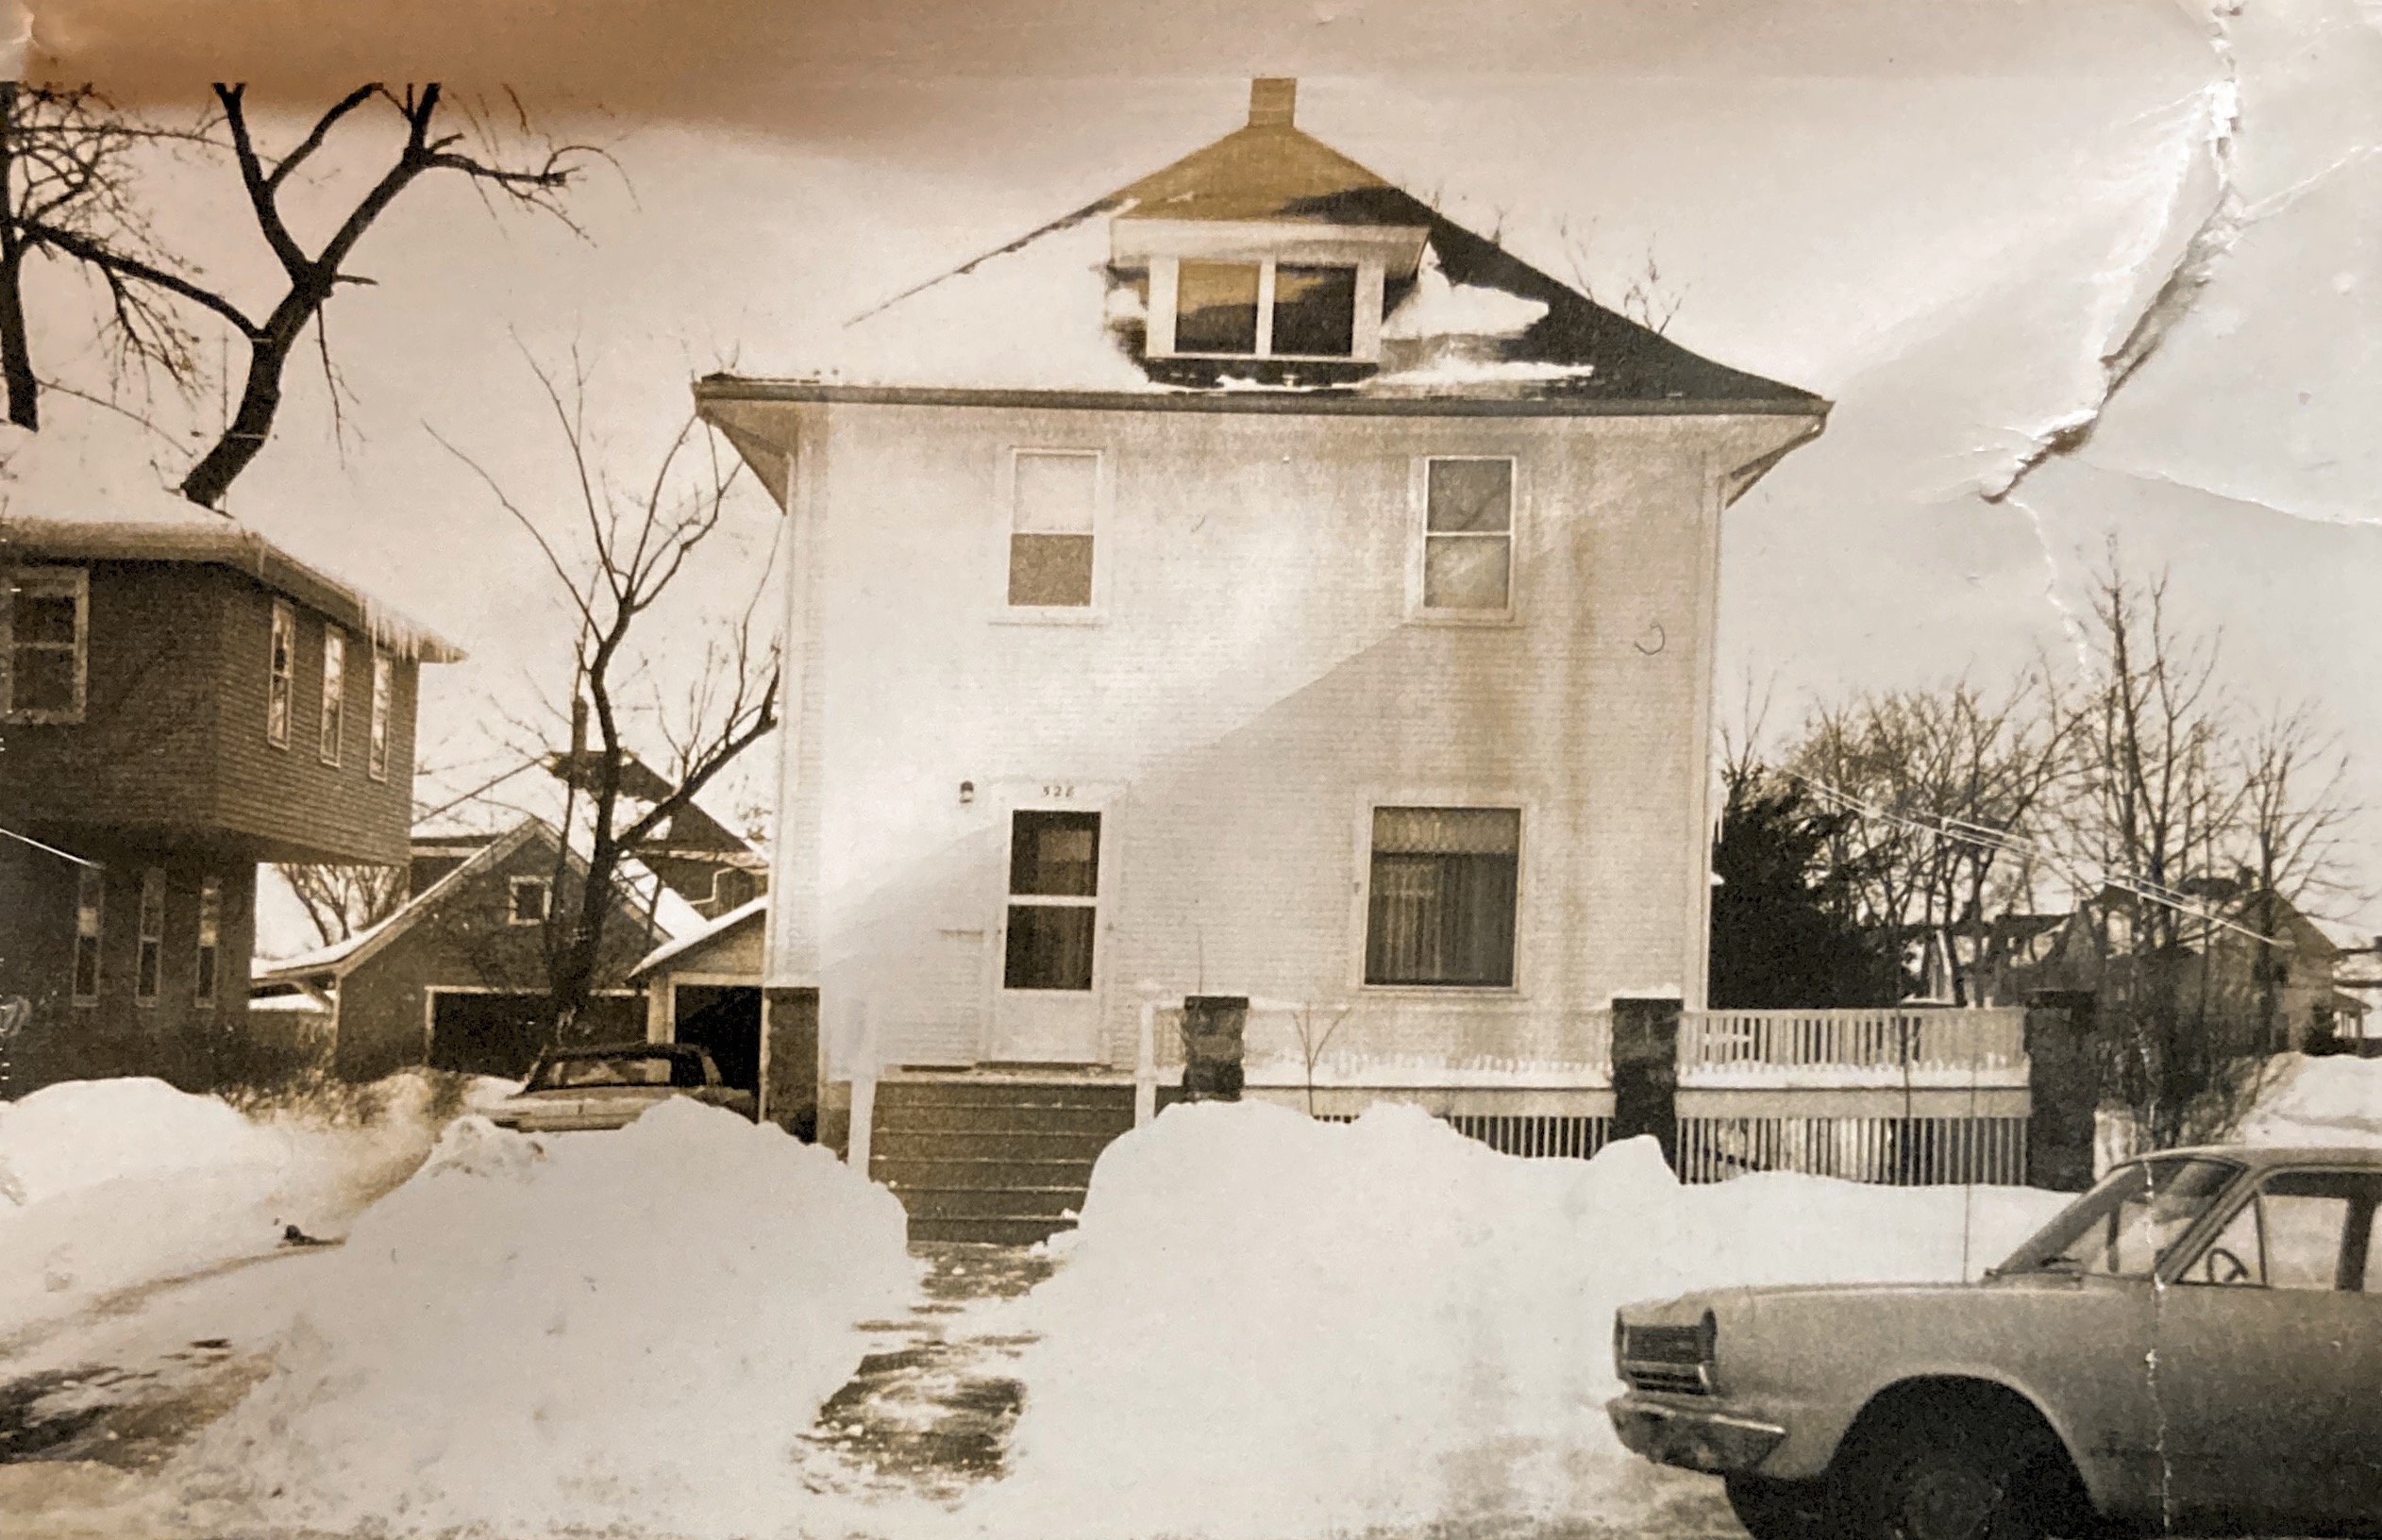 Feb 10, 1967 - 2 weeks after the ‘big snow’